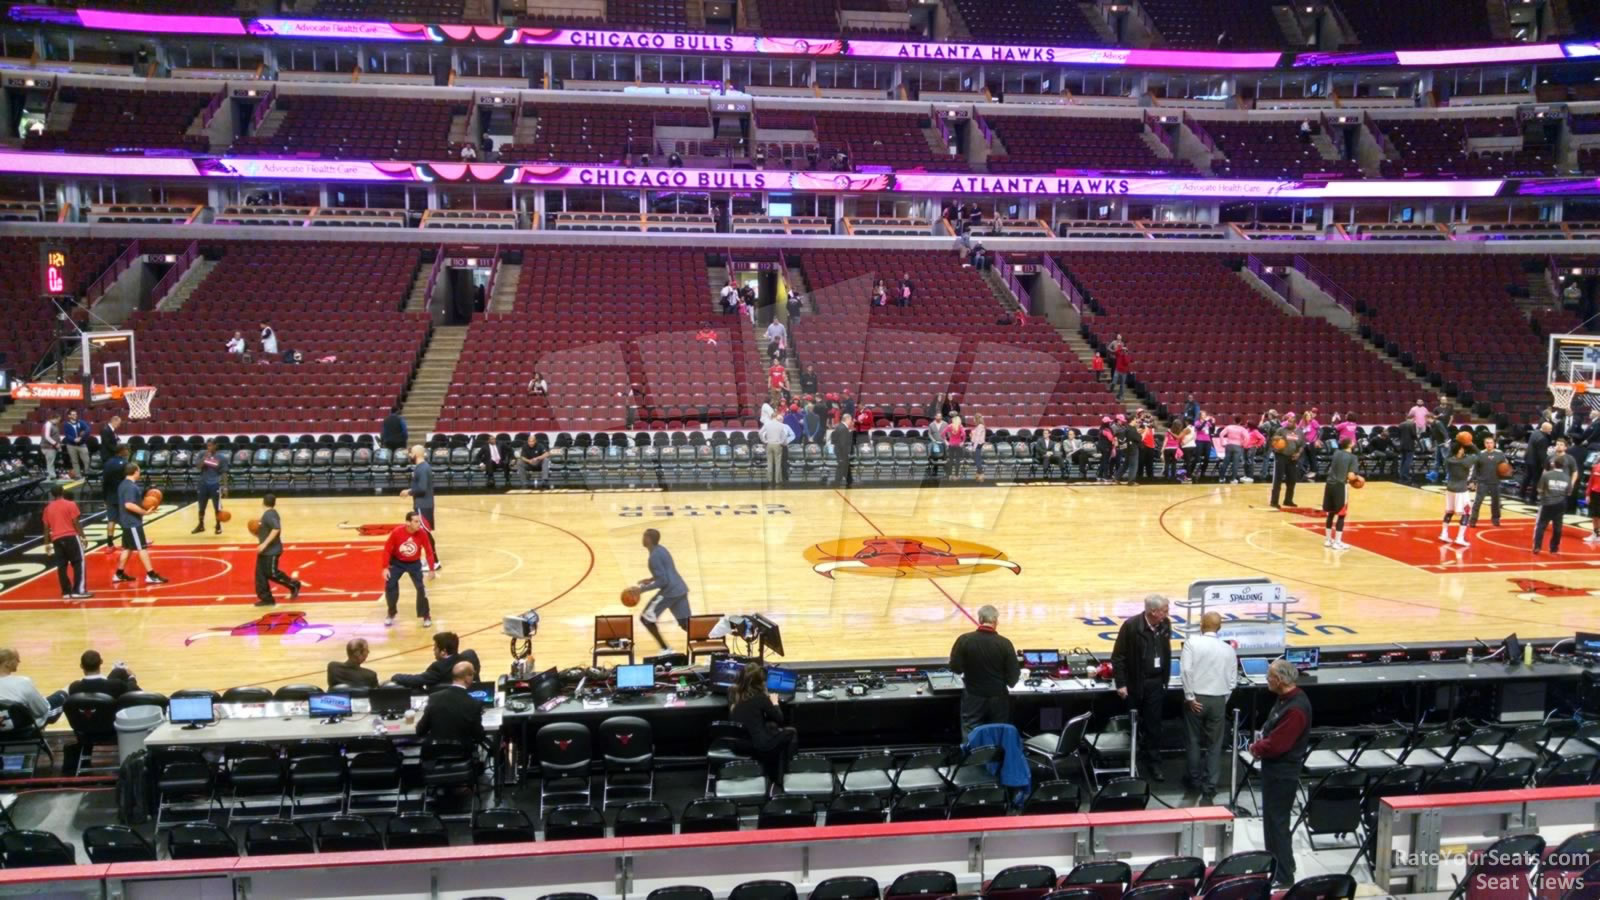 United Center Section 101 - Chicago Bulls - RateYourSeats.com